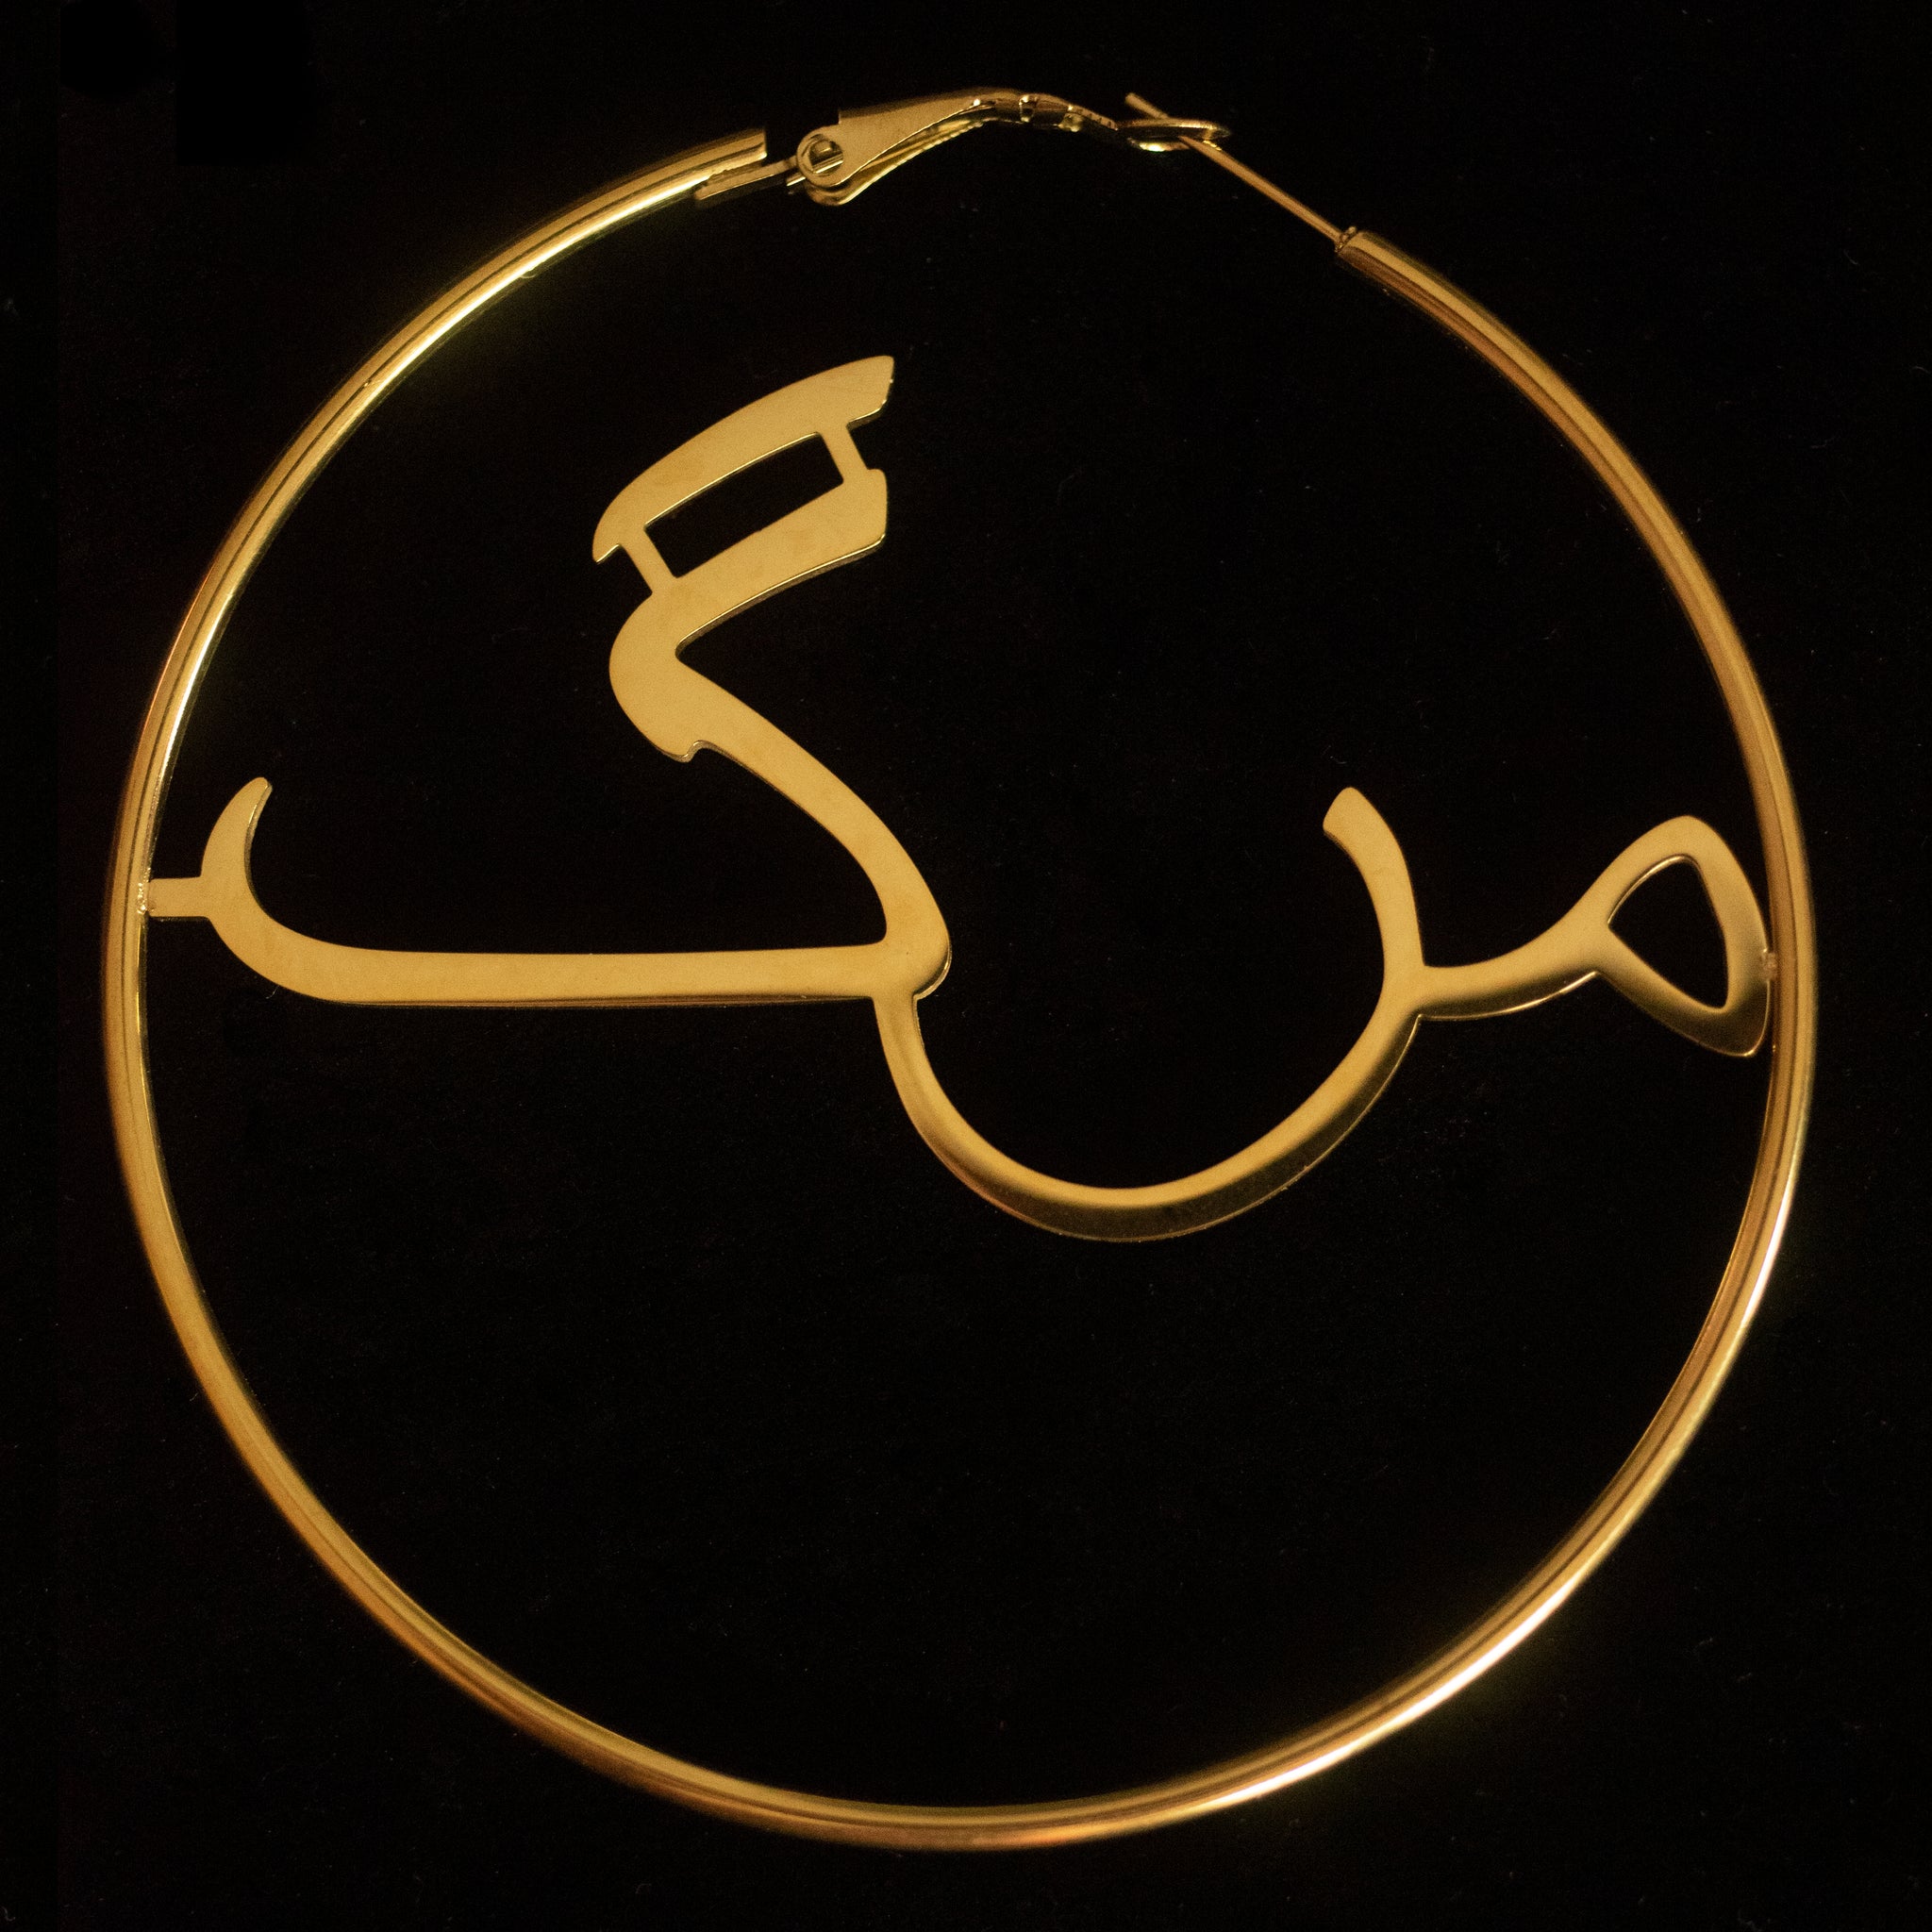 Against a black background sits a gold hoop that says the word 'marg' in the middle.